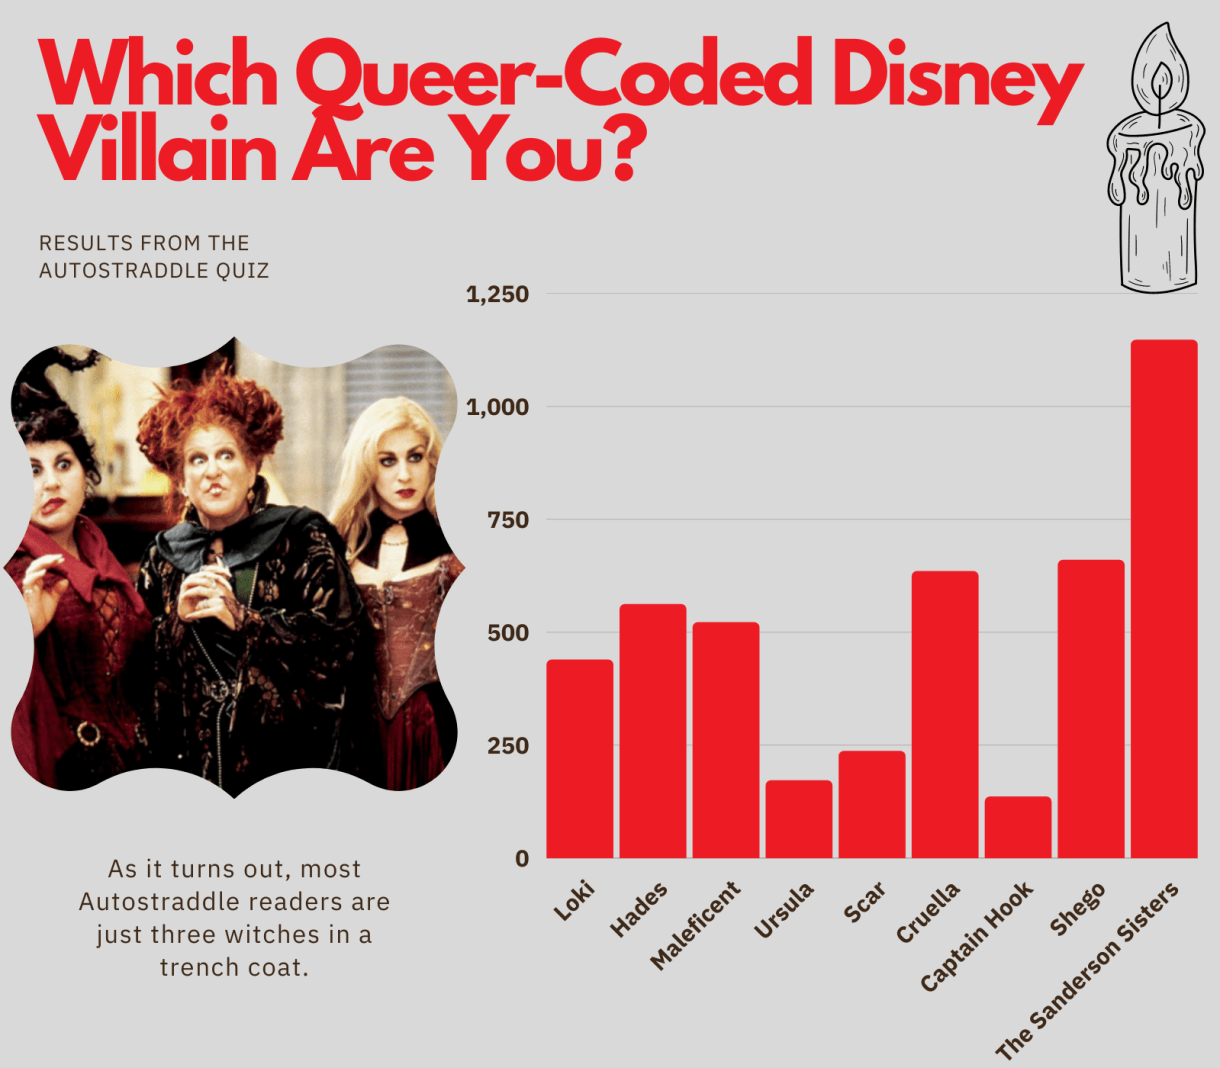 the quiz results show that the majority of autostraddle readers are the Sanderson sisters at 1,147 results. the graphic says, Which Queer-Coded Disney Villain Are You? As it turns out, most Autostraddle readers are just three witches in a trench coat. There is also a screen shot of the Sanderson Sisters from the original hocus pocus. The rest of the results are: 439 people are Loki, 562 are Hades, 522 are Maleficent, 172 are Ursula, 237 are Scar, 635 are Cruella, 136 are Captain Hook, 660 are Shego.